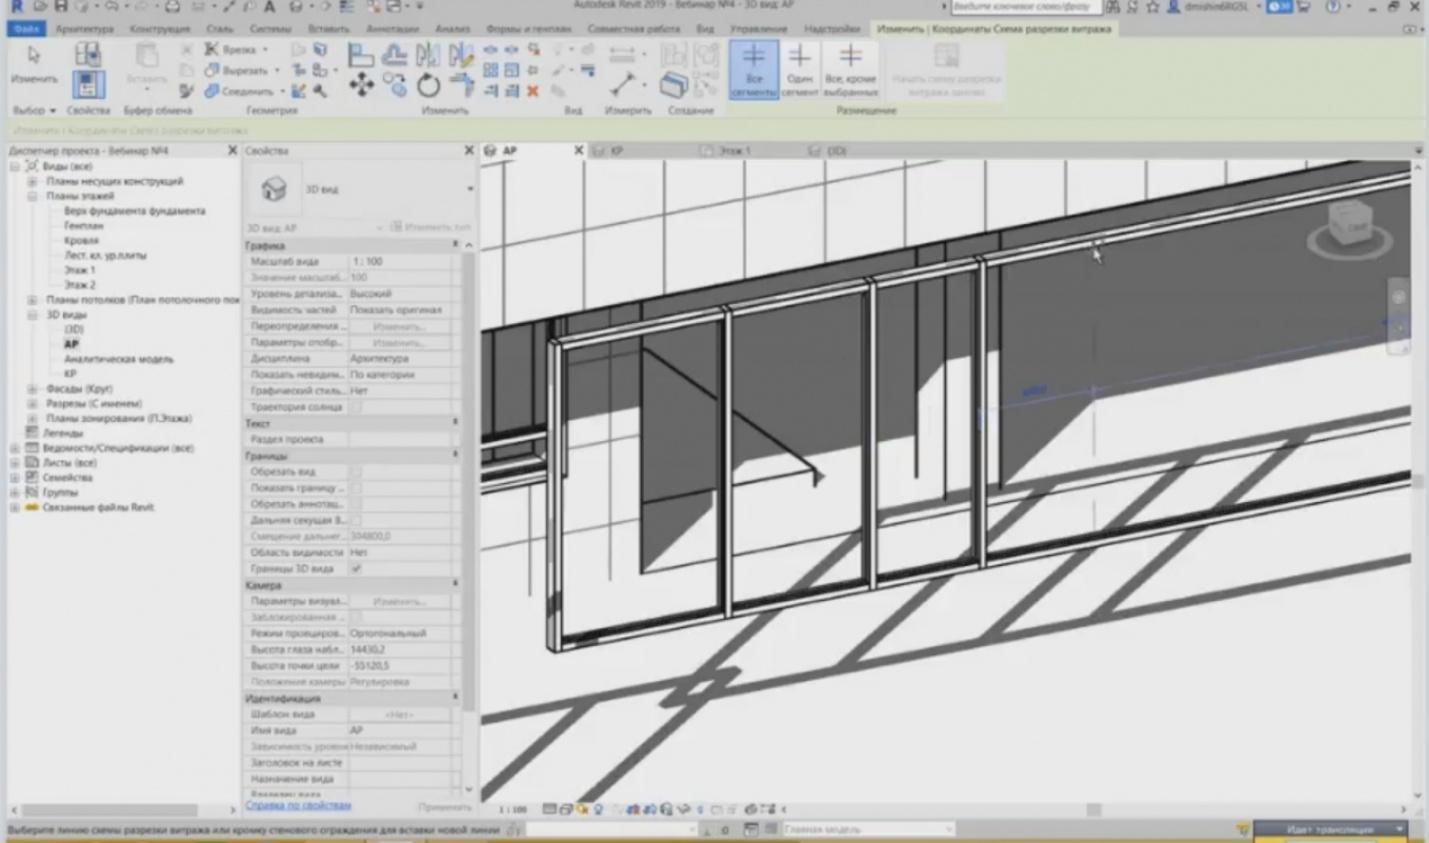 BIM DESIGN IN REVIT. CREATING ARCHITECTURAL AND STRUCTURAL ELEMENTS. PAGE 2-30